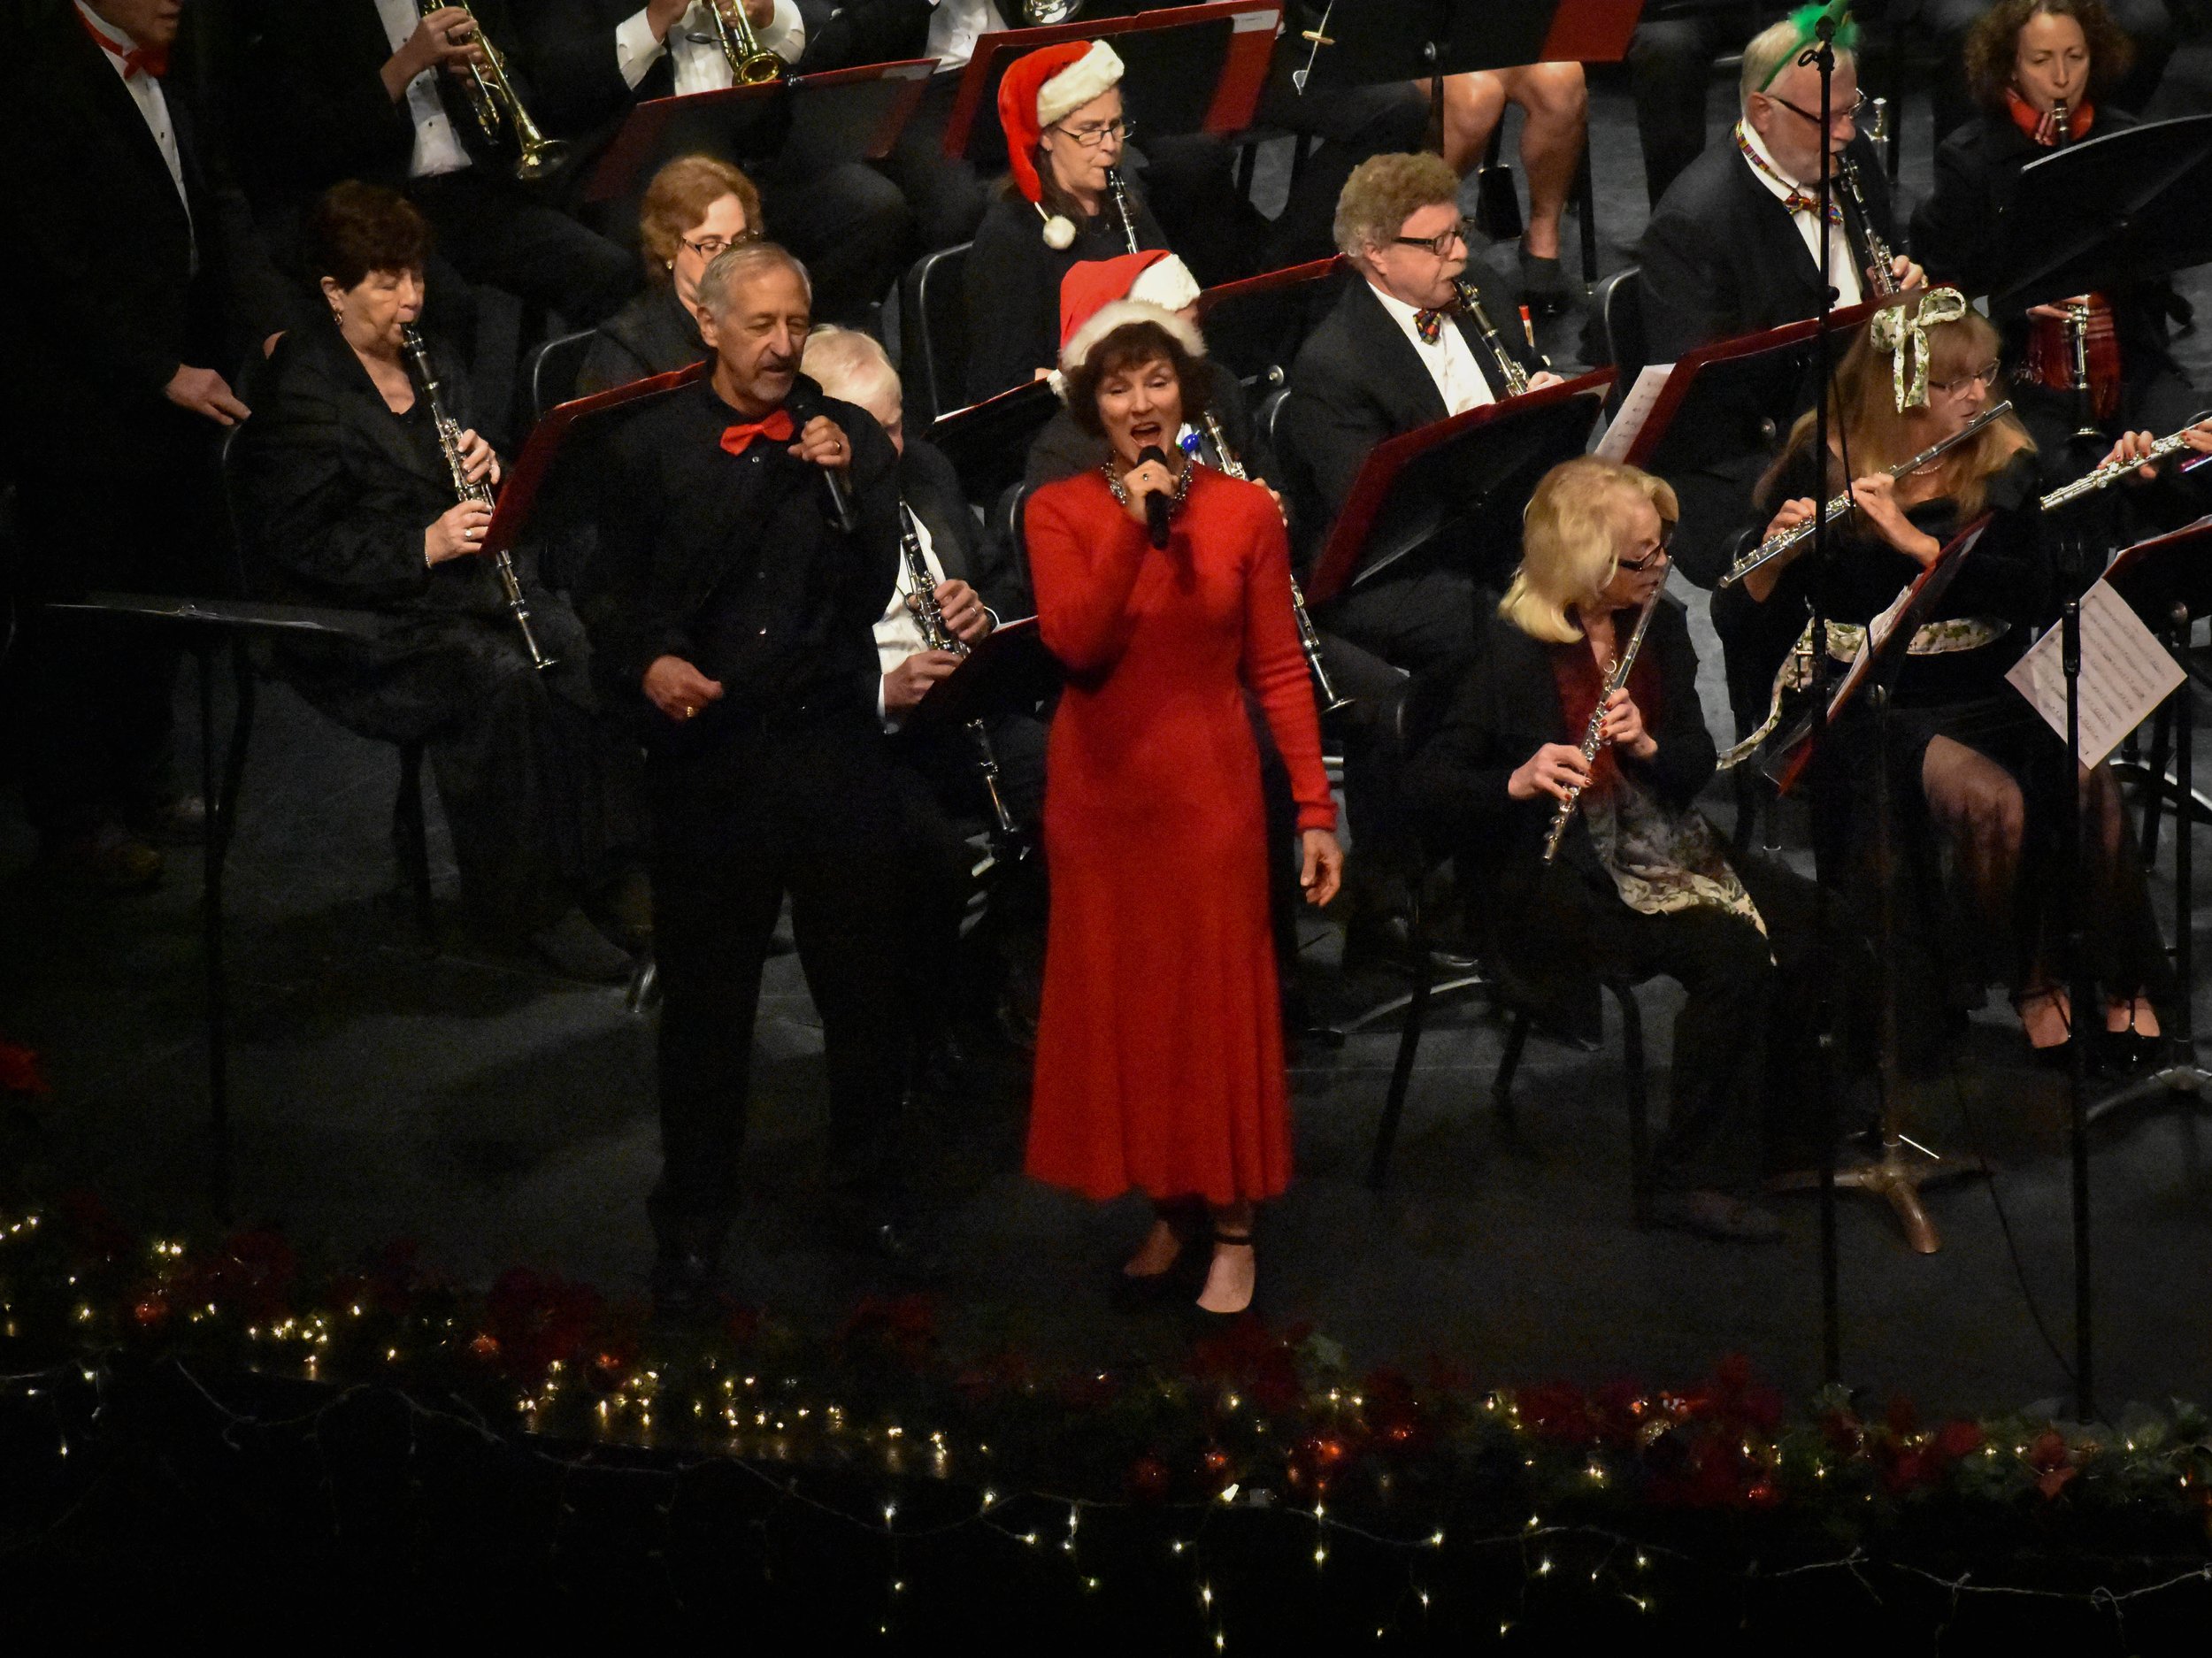 12-18-2022 LCCB Holiday Concert by Peyton Webster145-79.jpg